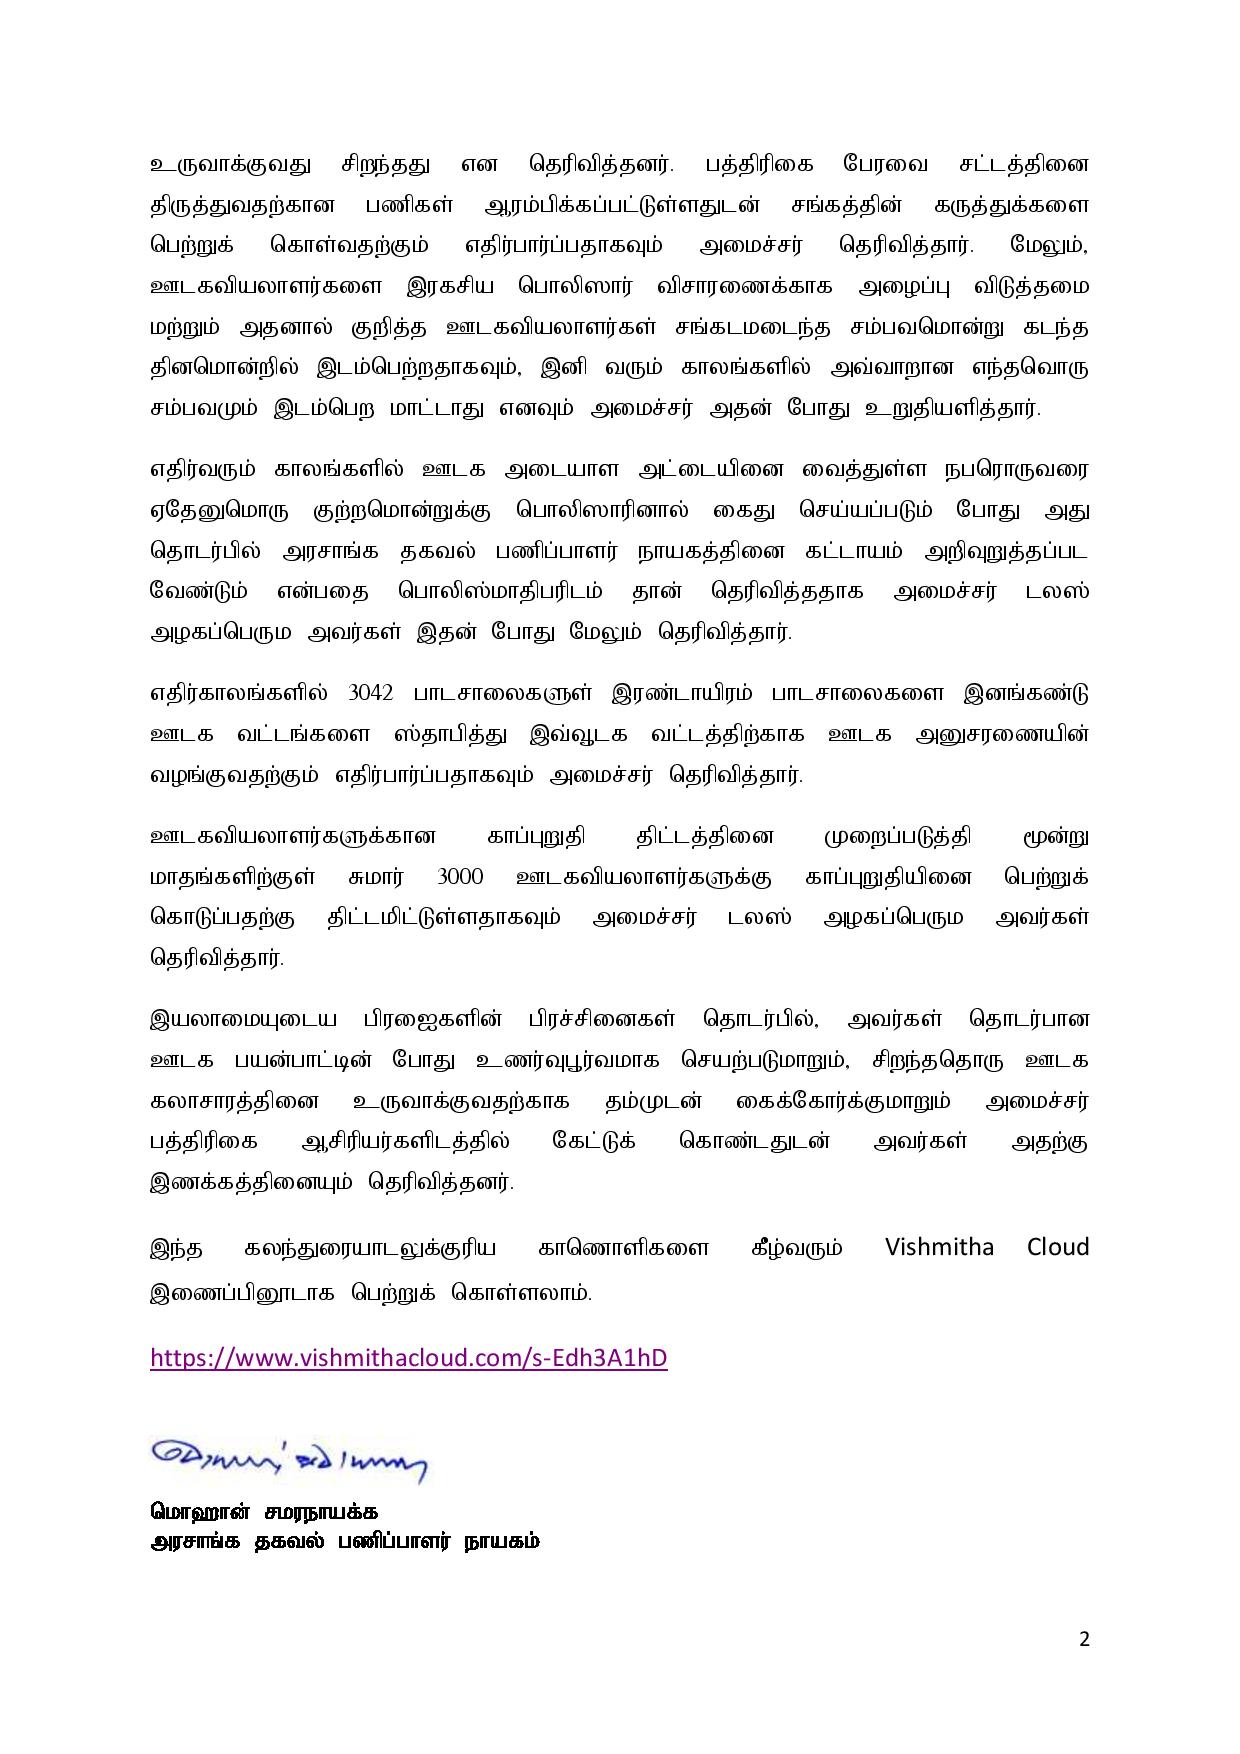 Press Release 1007 Tamil page 002